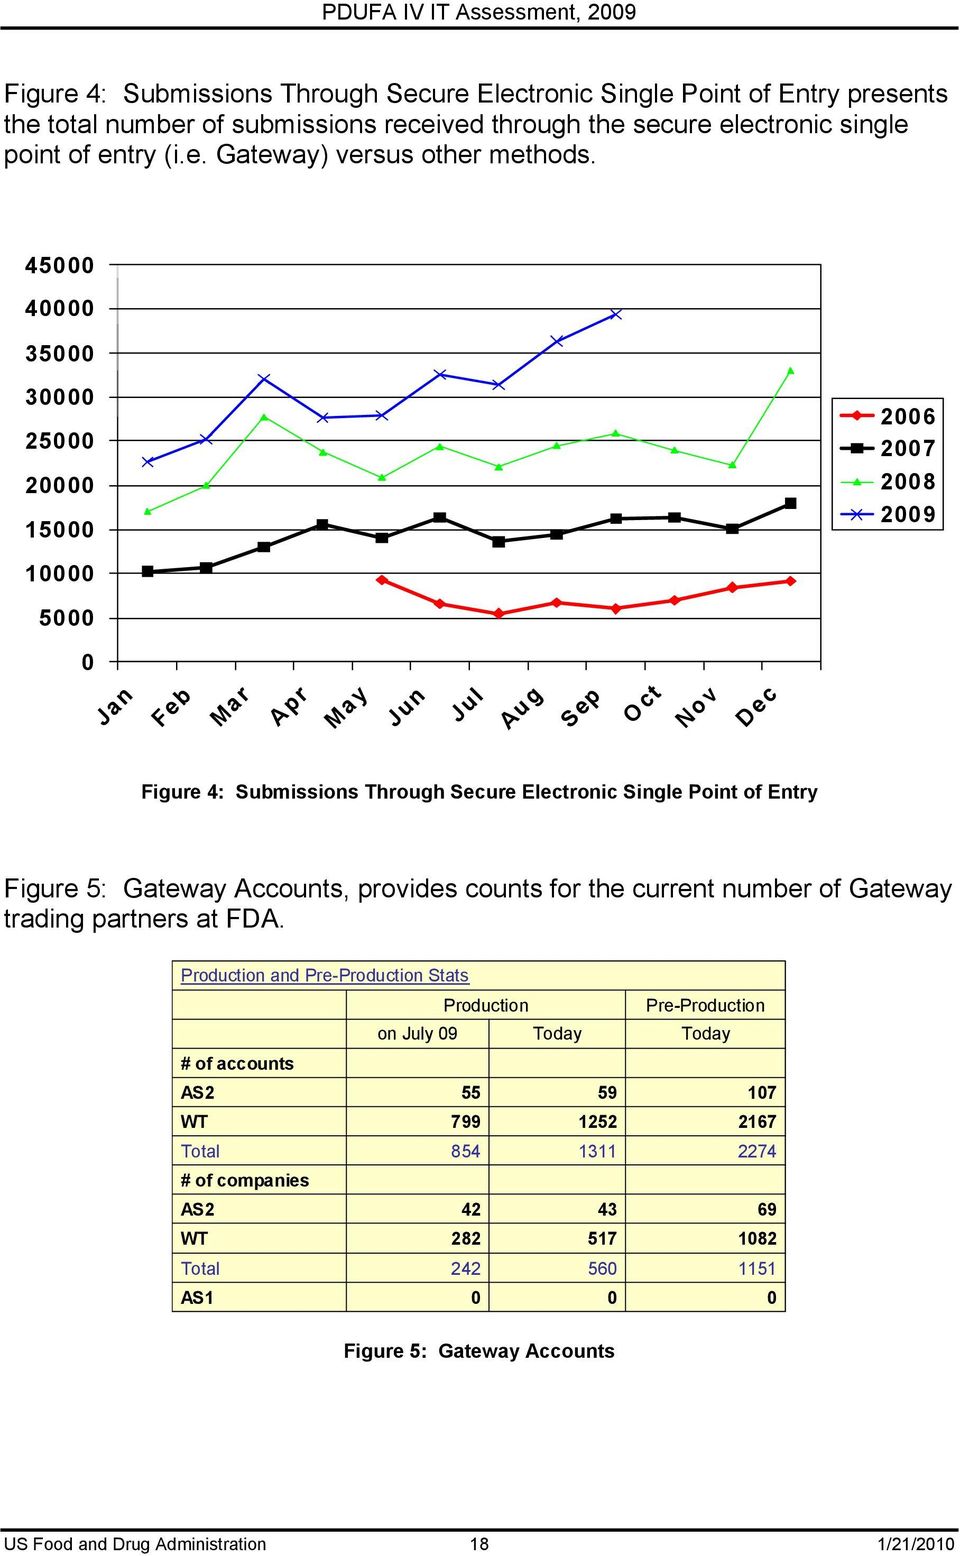 Figure 5: Gateway Accounts, provides counts for the current number of Gateway trading partners at FDA.